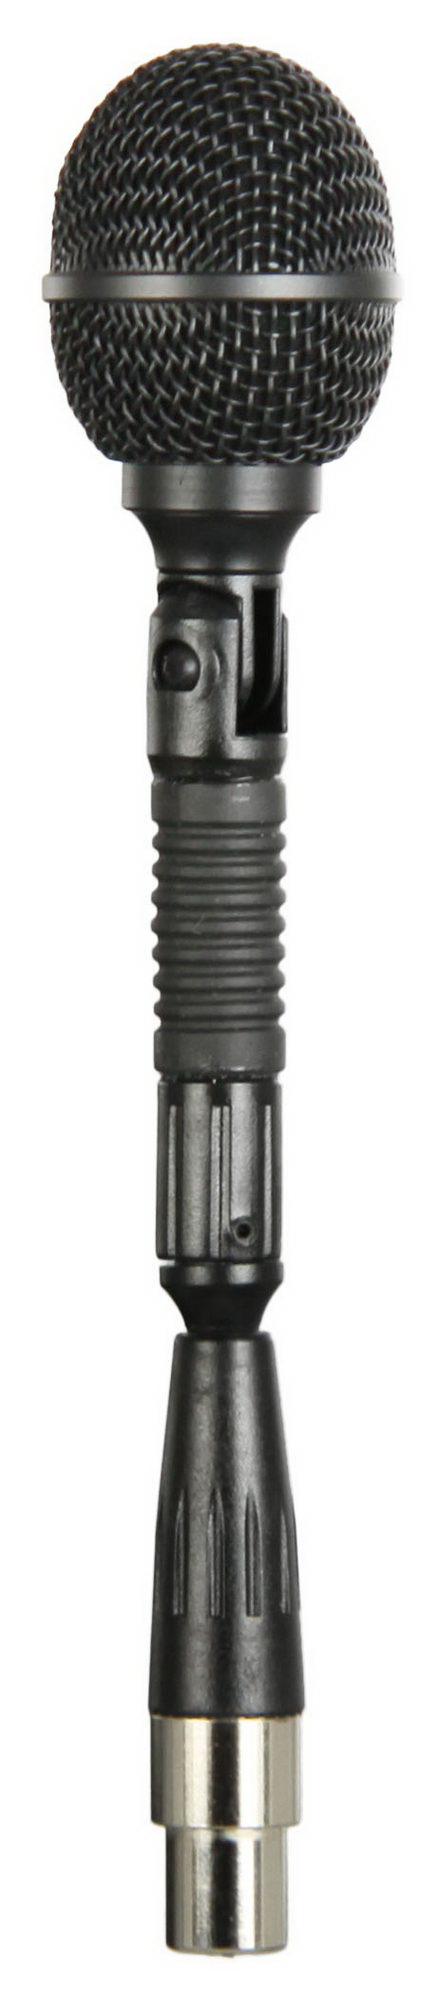 10mm uni-directional Condenser Microphone with TA4F 4 Pin connector (130mm)